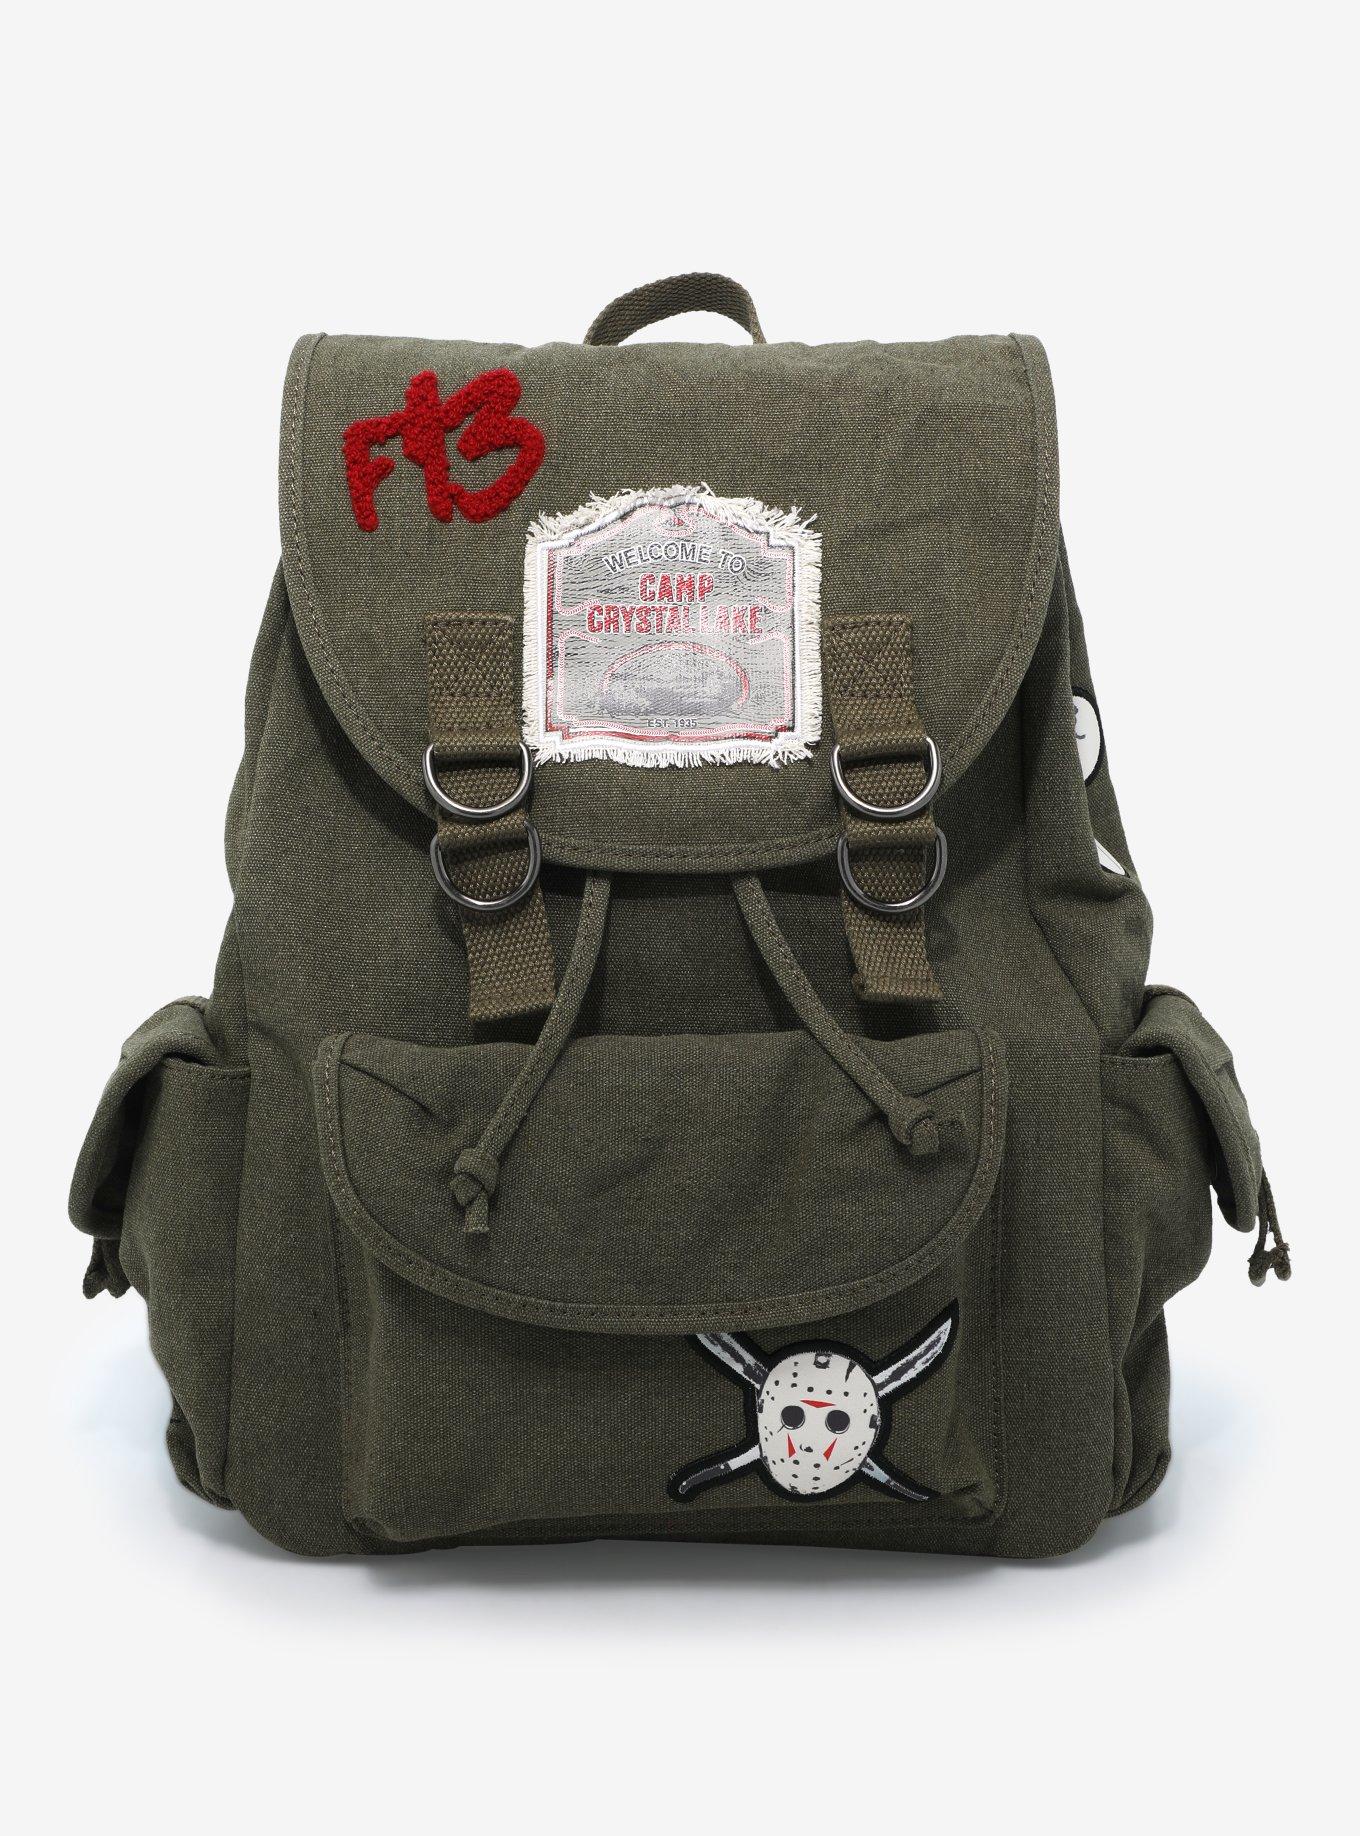 Punk Pirate Bunny Cinch Backpack